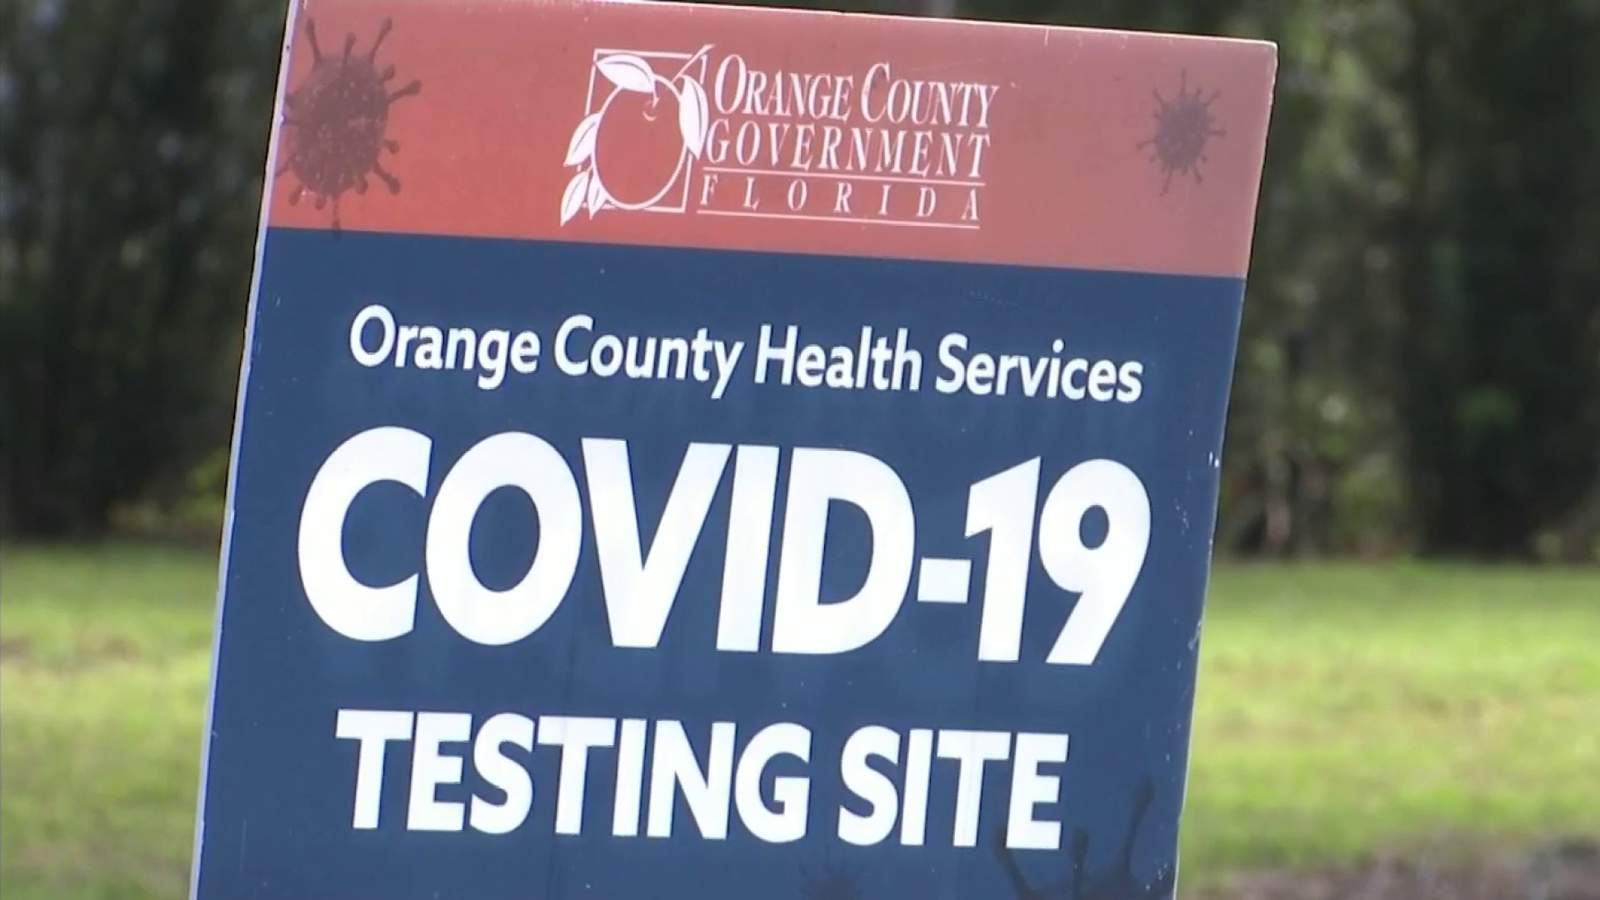 Free rapid COVID-19 tests to be offered at Barnett Park through the end of the year